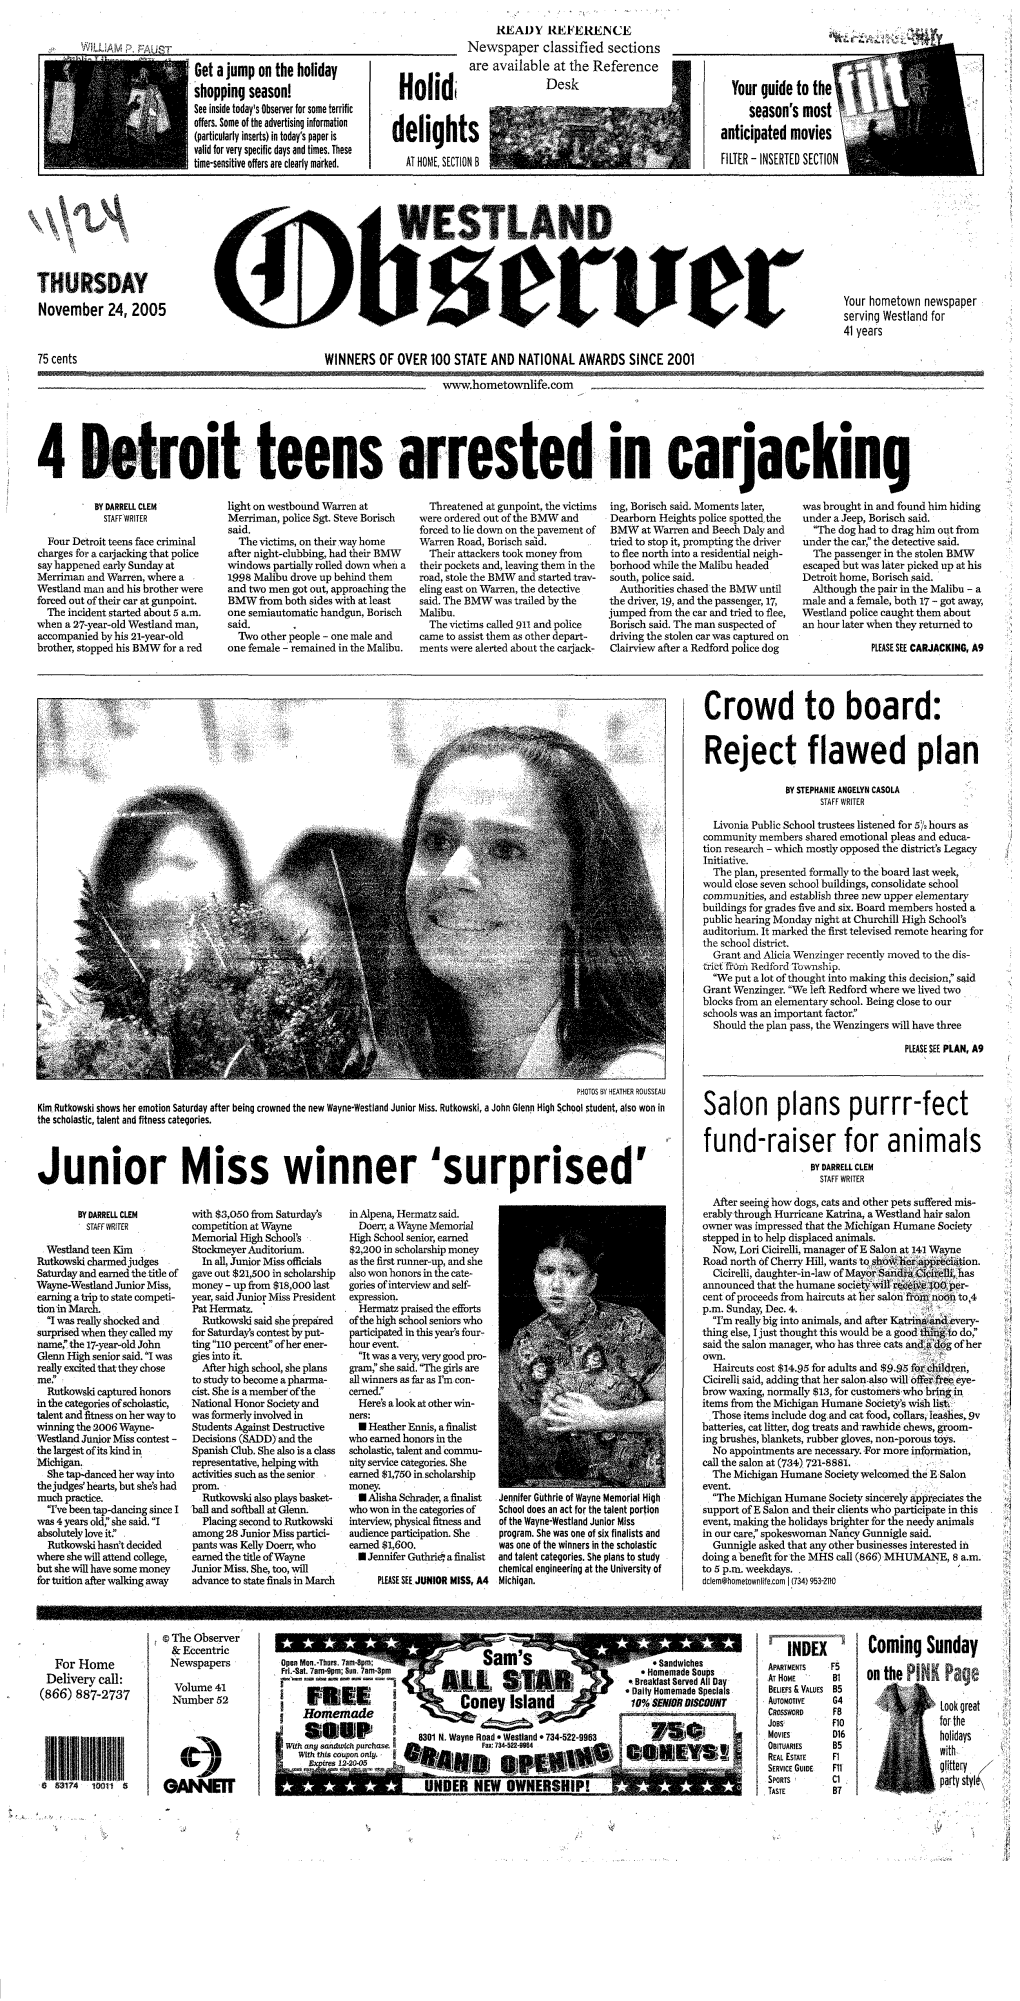 Junior Miss Winner 'Surprised' STAFF WRITER After Seeing How Dogs, Cats and Other Pets Suffered Mis­ BYDARRELLCLEM with $3,050 from Saturday's in Alpena, Hermatz Said